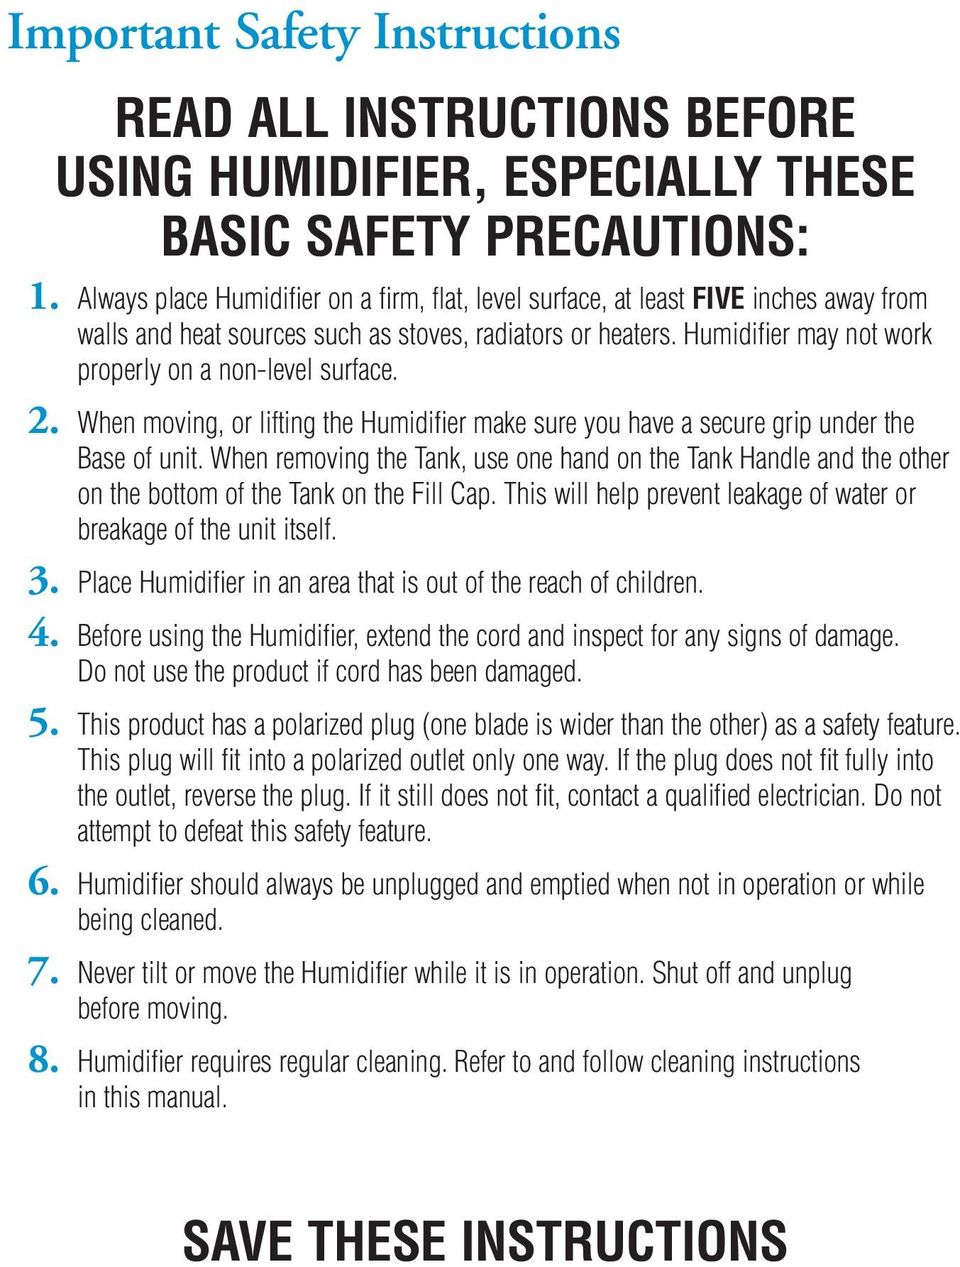 Humidifier may not work properly on a non-level surface. 2. When moving, or lifting the Humidifier make sure you have a secure grip under the Base of unit.